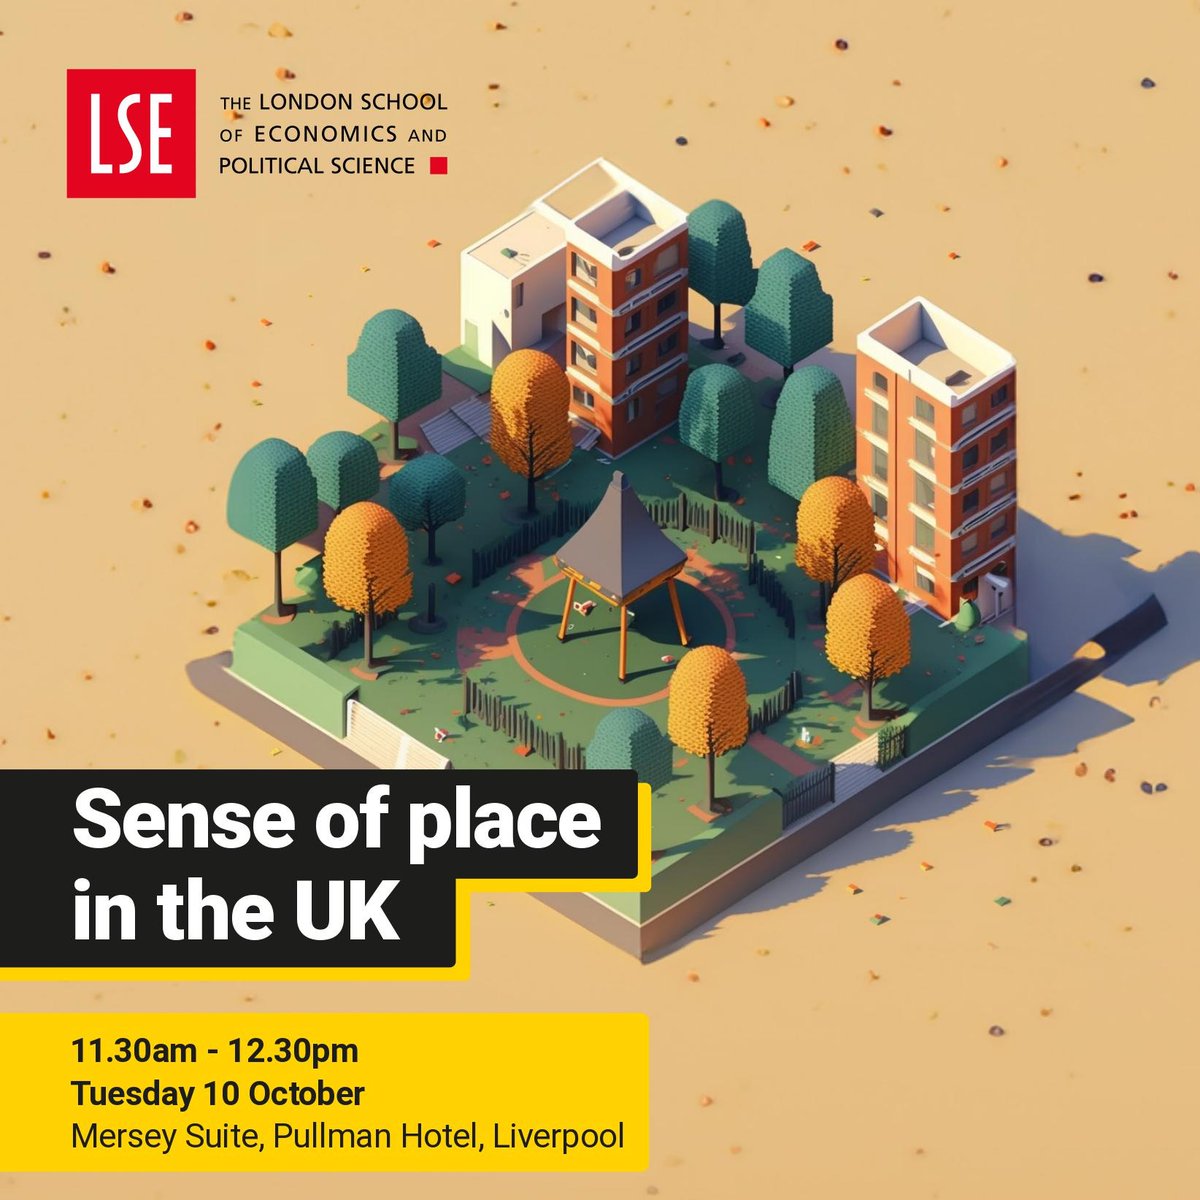 In Liverpool for Labour Party Conference today? Don't miss our LSE panel on how #Labour can build better #PublicPlaces for future generations. Join @atjuliaking, @lucianaberger, @VictoriaRTPI, @SharonStevenage & @Nesil_Caliskan from 11.30am – 12.30pm, Mersey Suite, Pullman Hotel